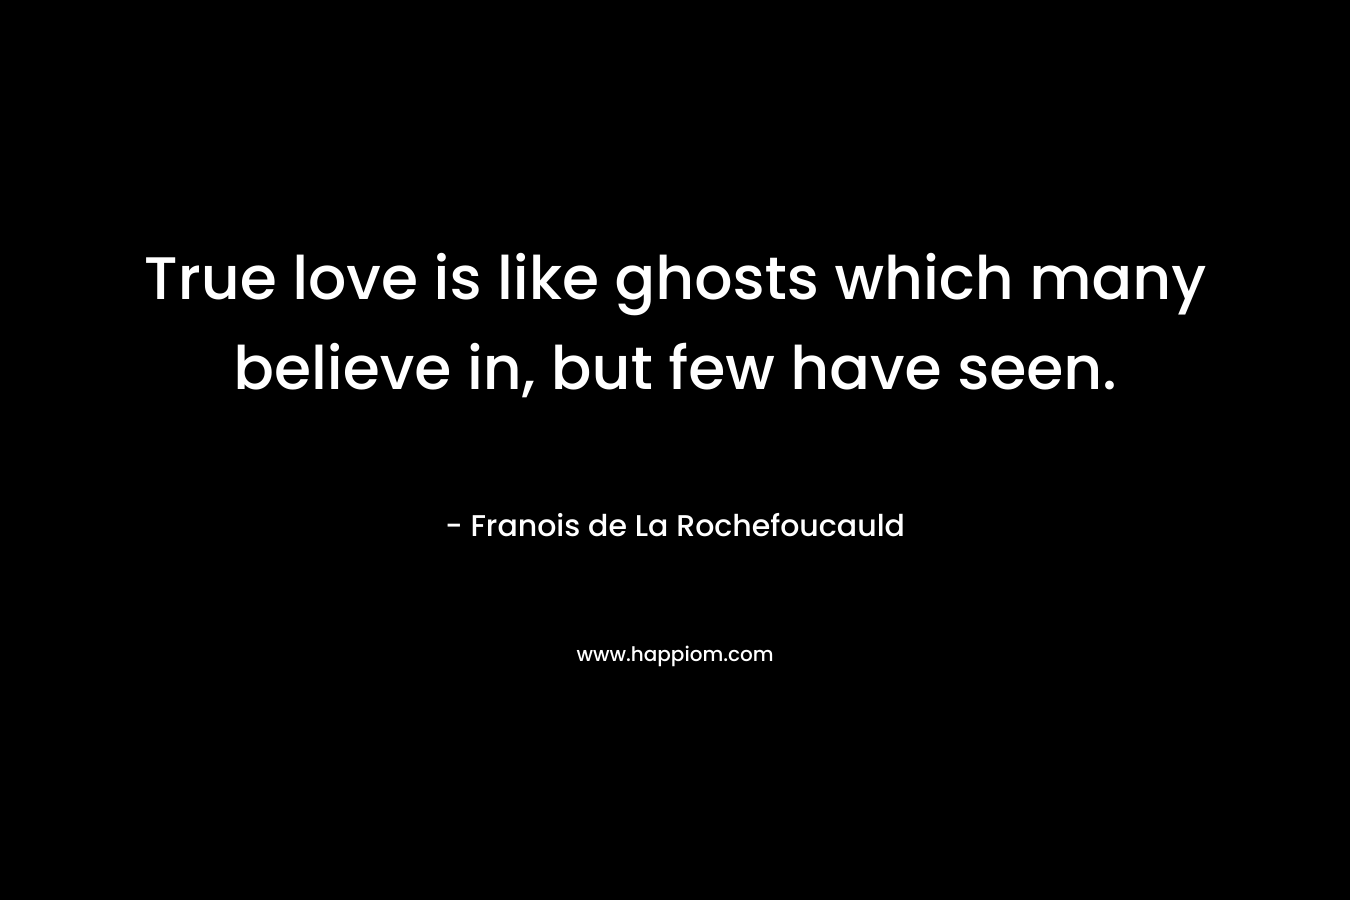 True love is like ghosts which many believe in, but few have seen.